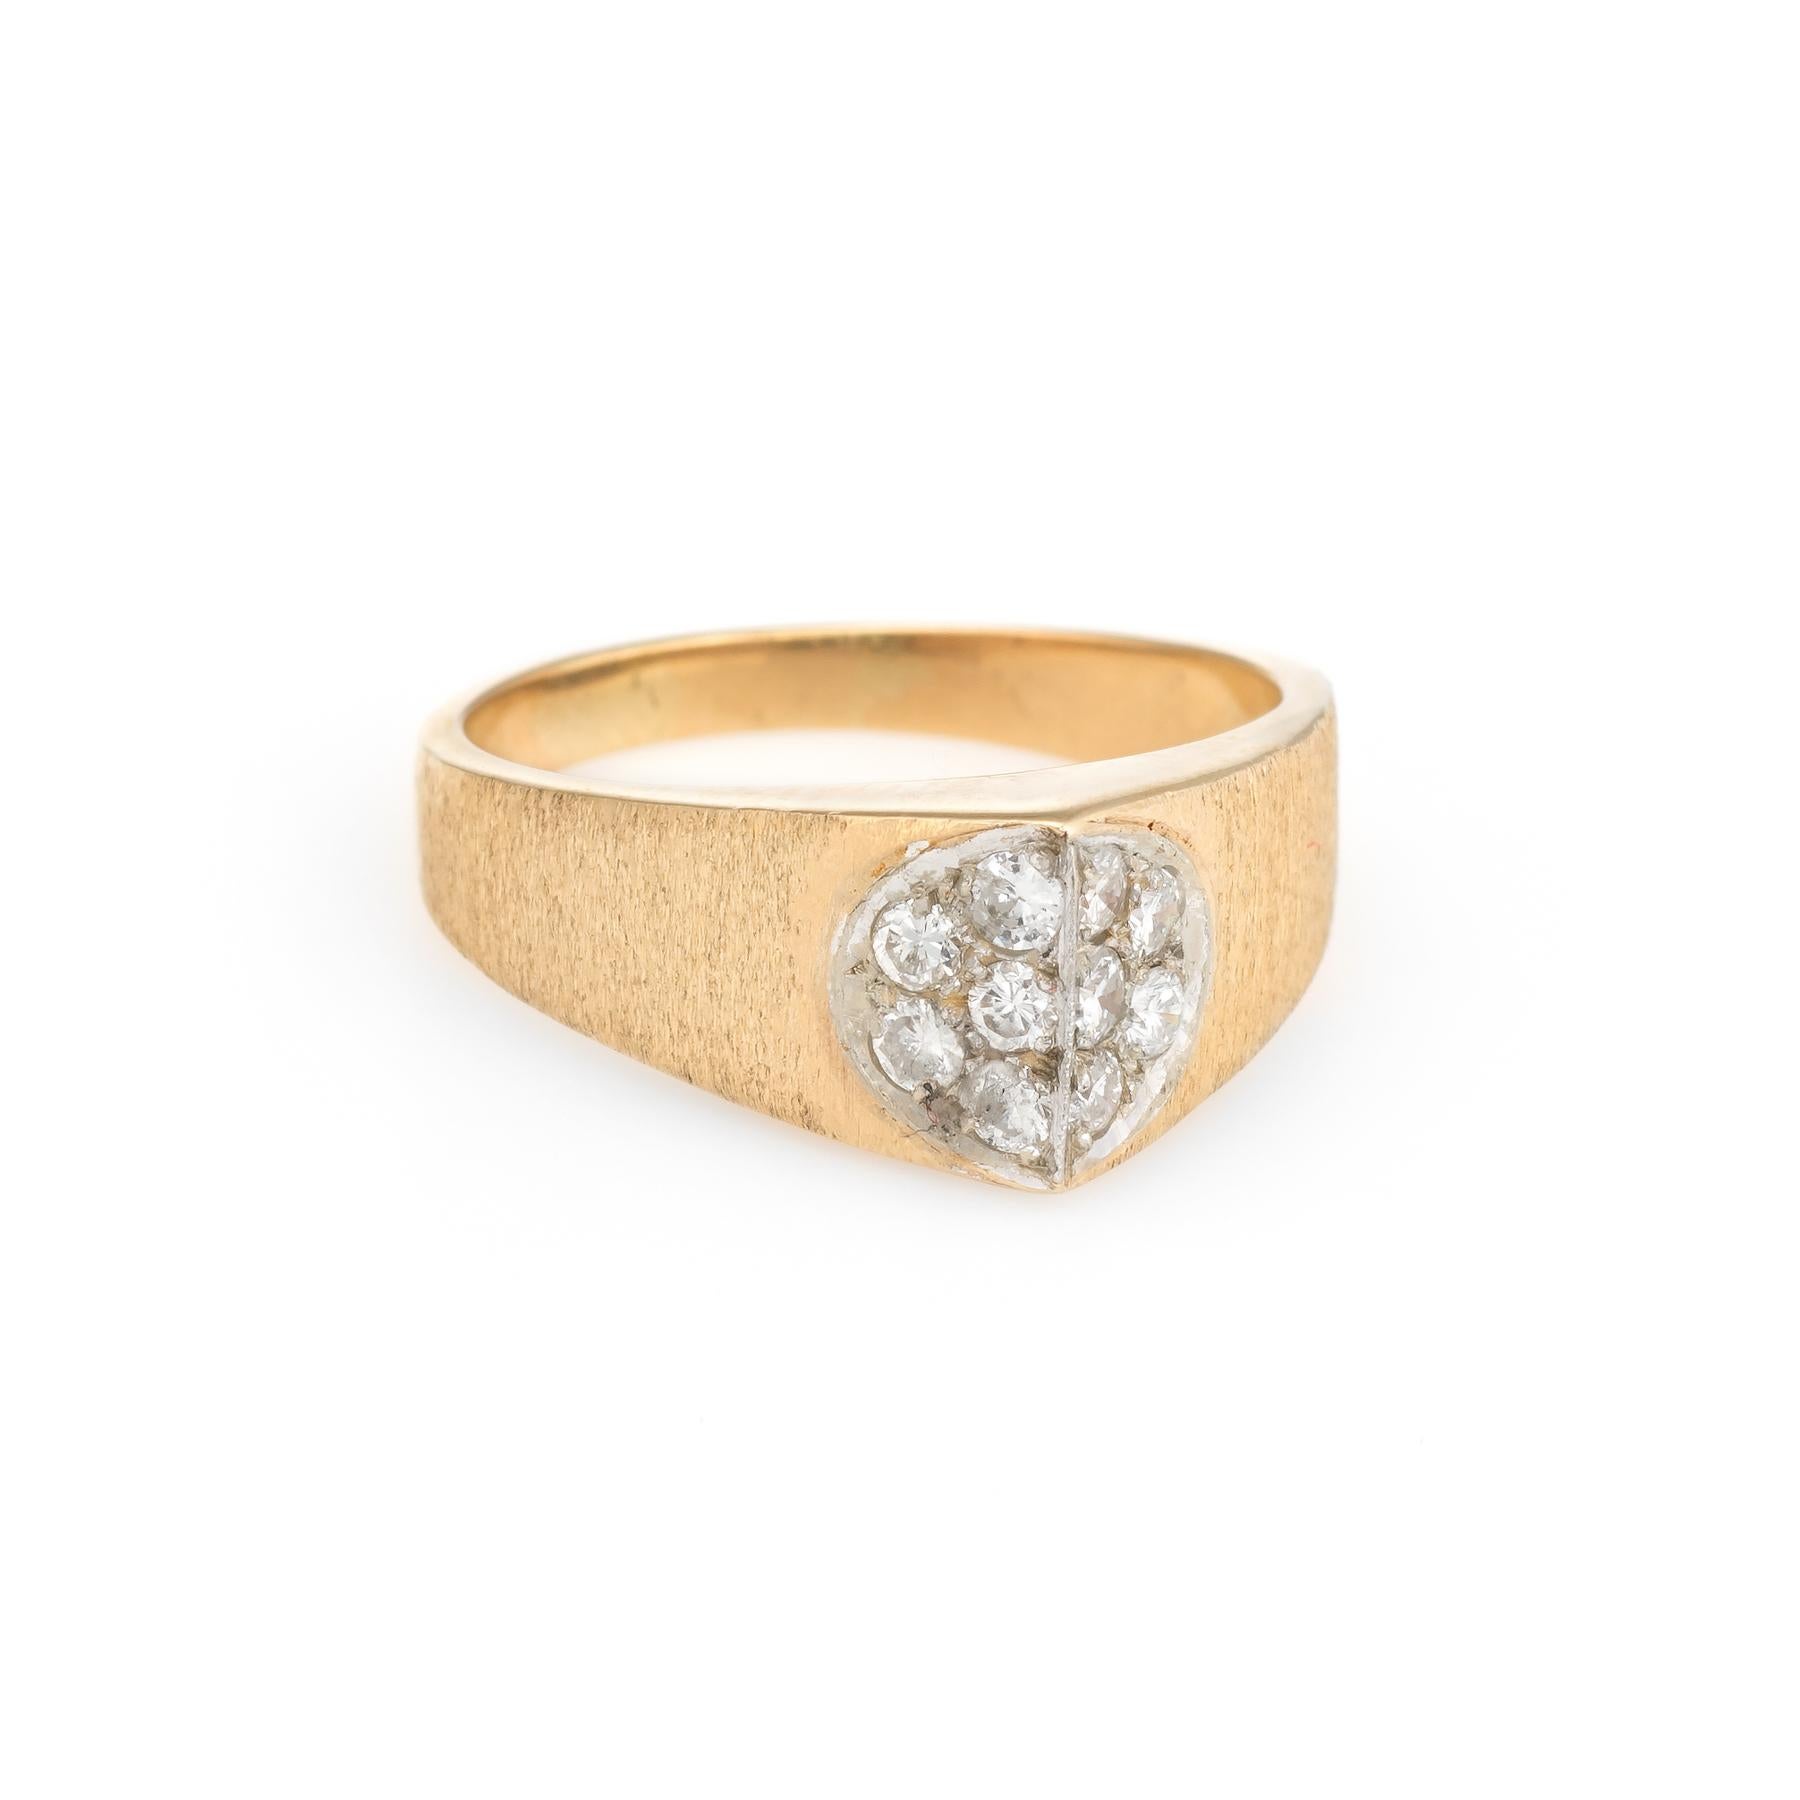 Elegant & finely detailed vintage band (circa 1960s to 1970s), crafted in 14 karat yellow gold. 

10 round brilliant cut diamonds are estimated at 0.03 carats each. The total diamond weight is estimated at 0.30 carats (estimated at H-I color and